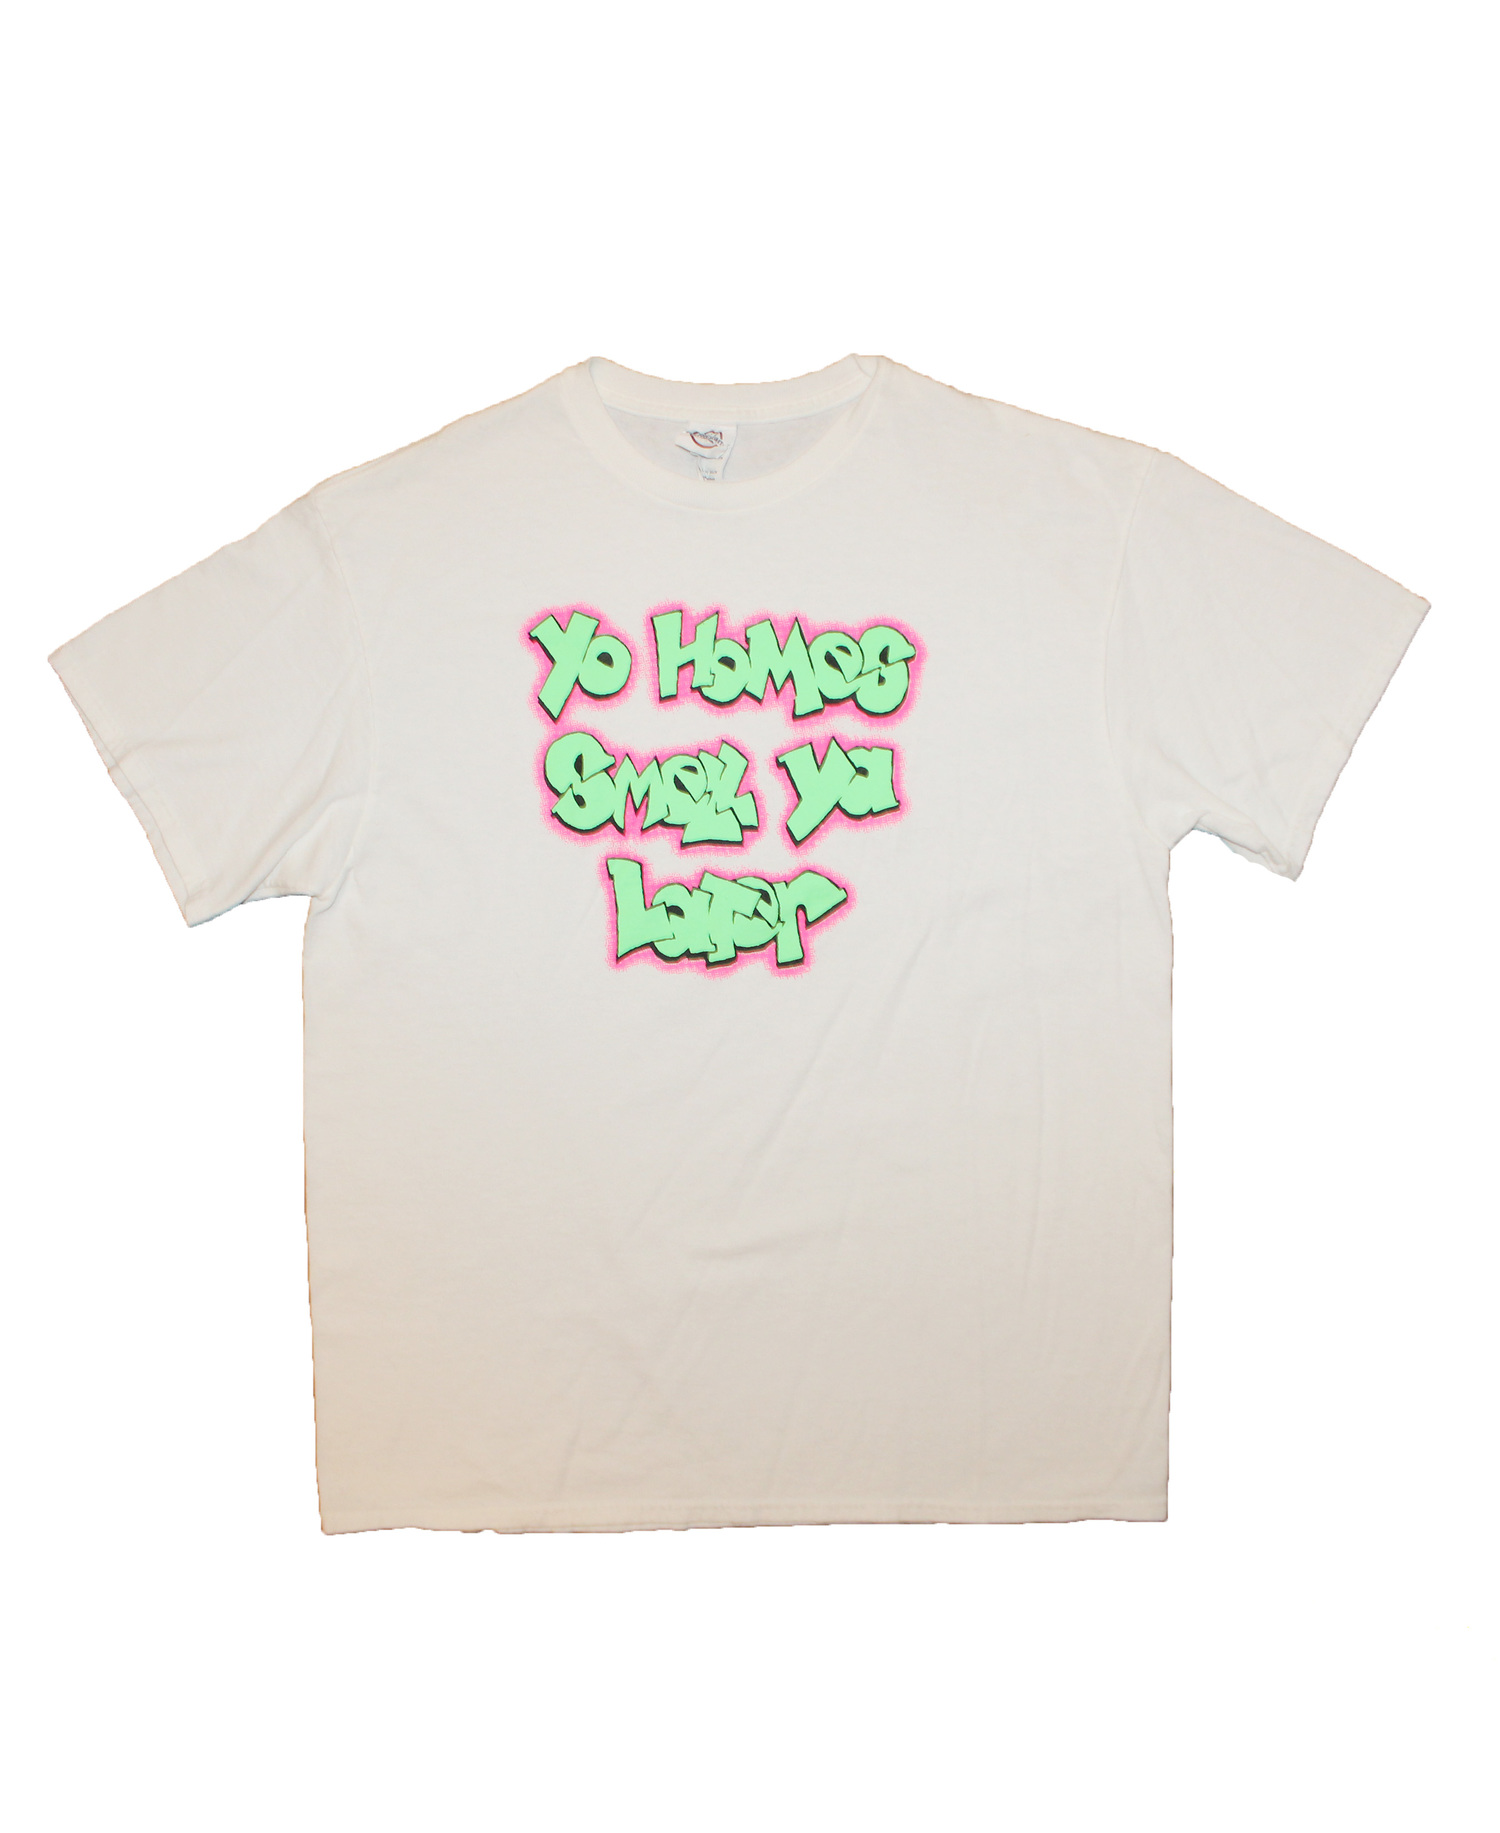 Vintage Fresh Prince of Bel Air Theme Song by Will Smith Yo Homes Smell Ya Later T Shirt Size Small